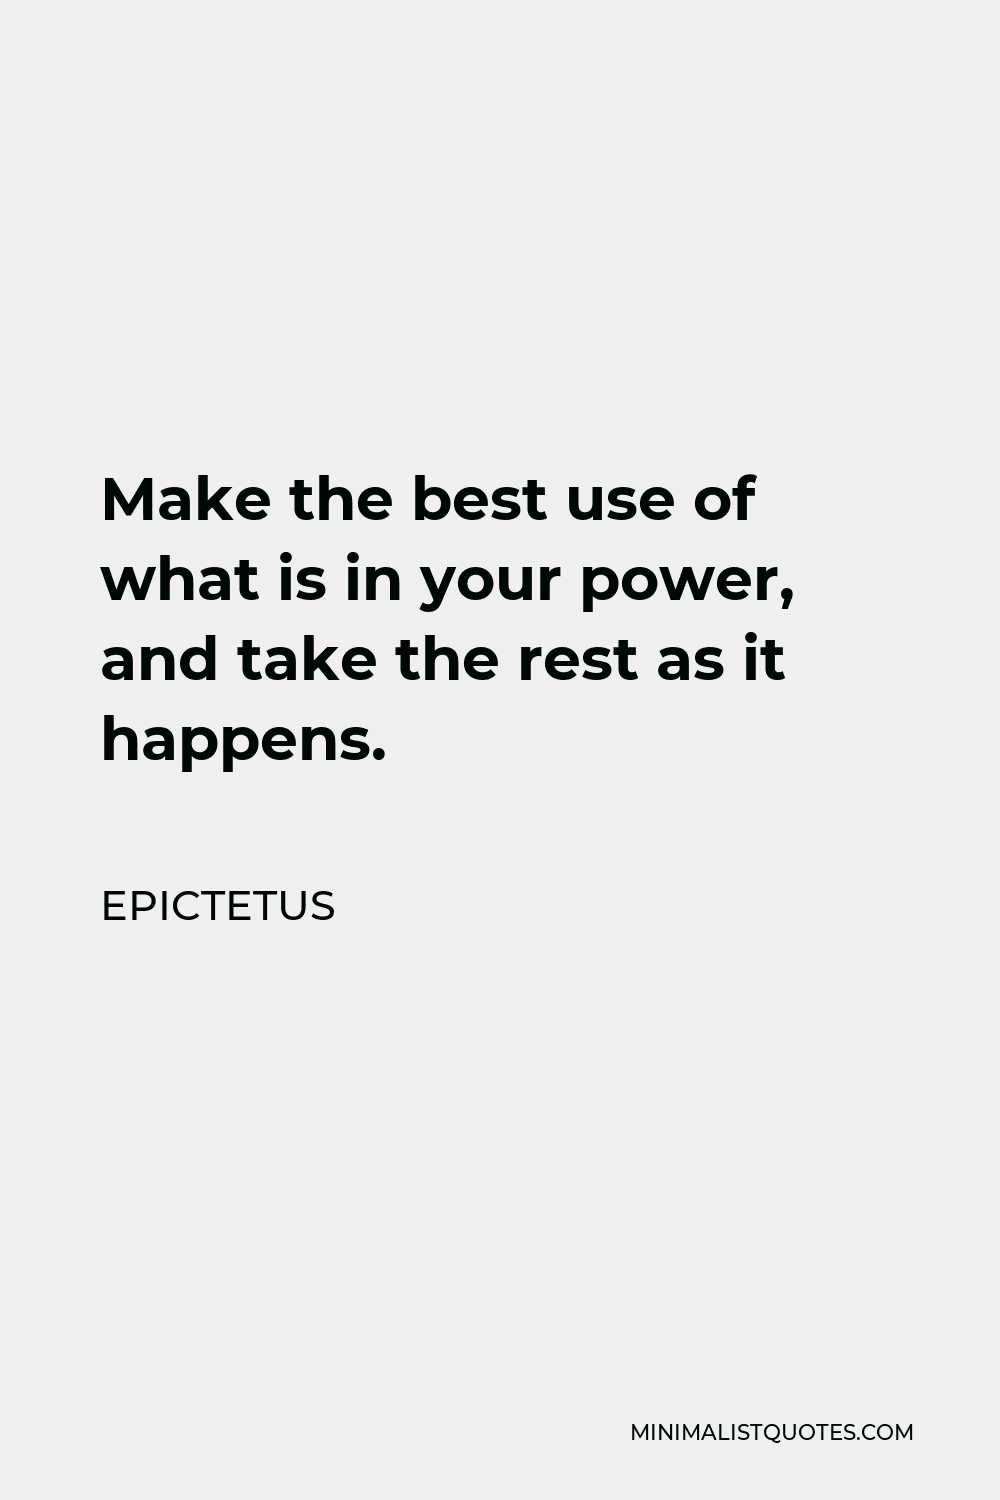 Epictetus Quote - Make the best use of what is in your power, and take the rest as it happens.